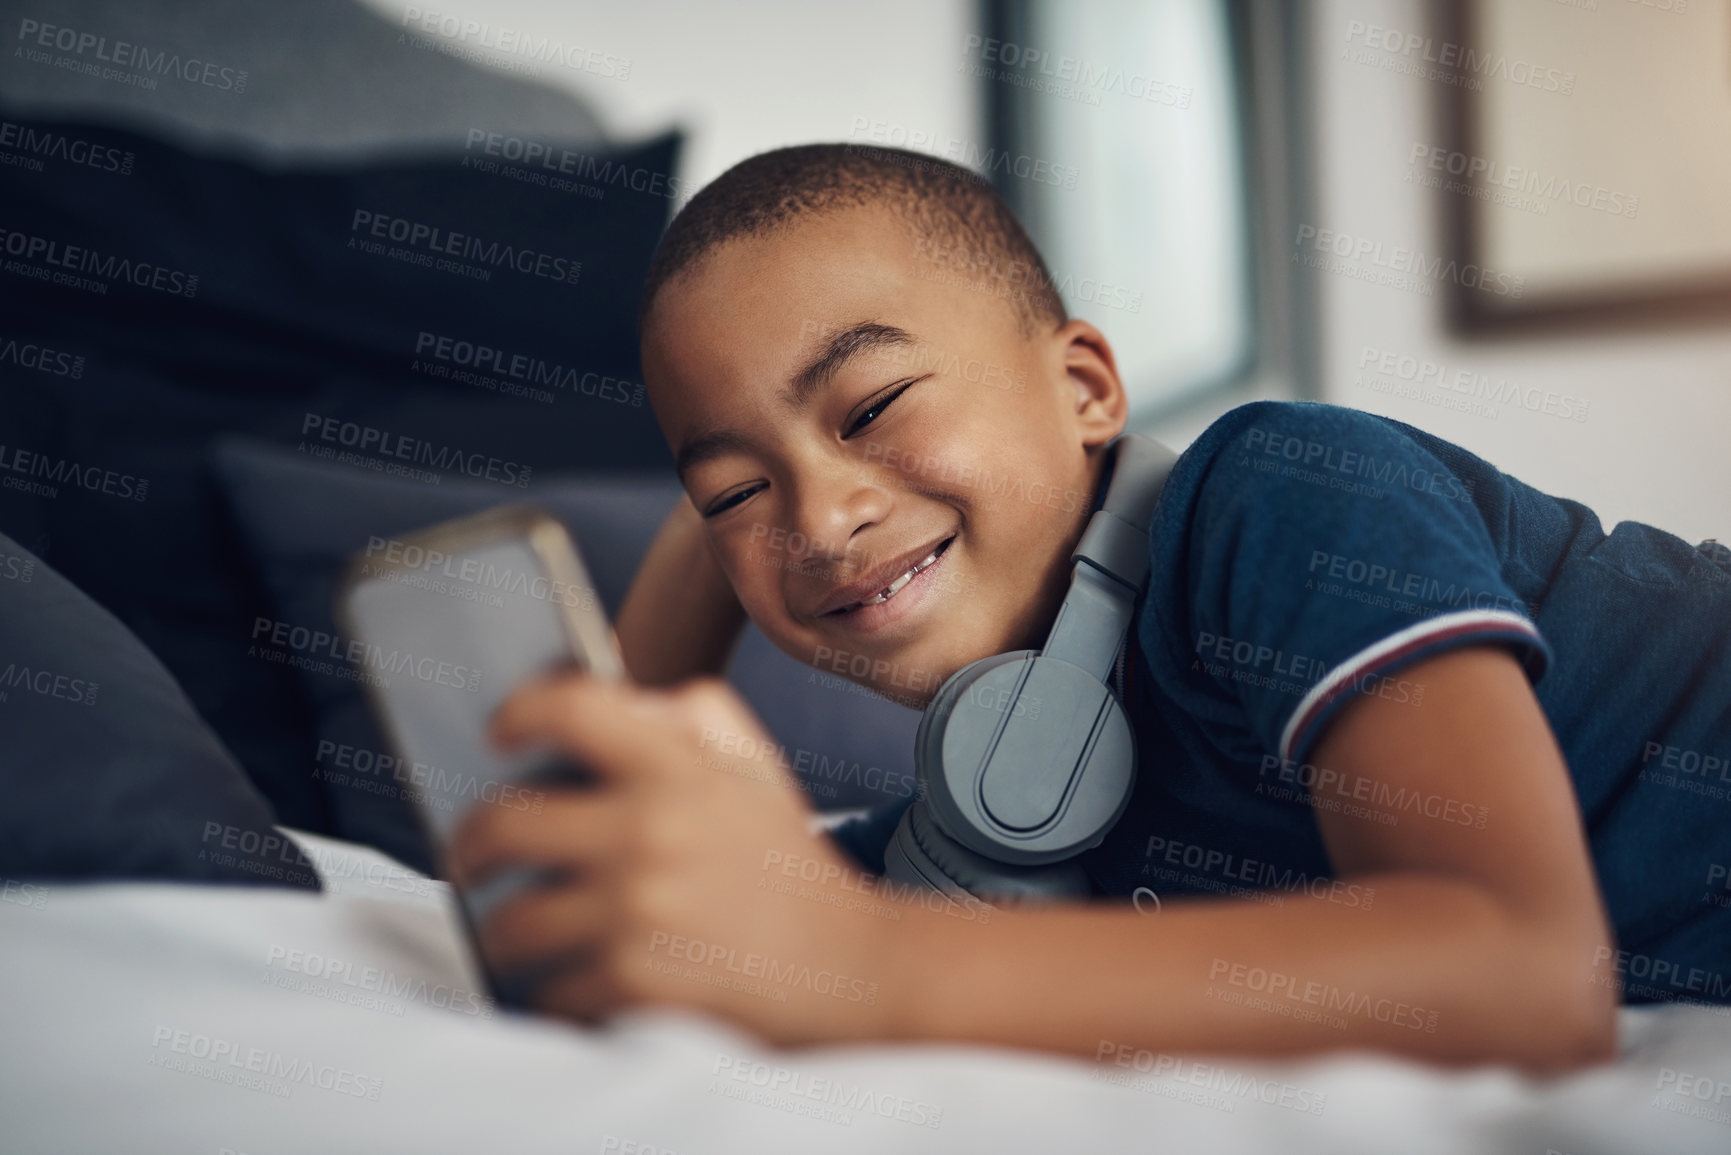 Buy stock photo Shot of a young boy using a cellphone while lying on his bed